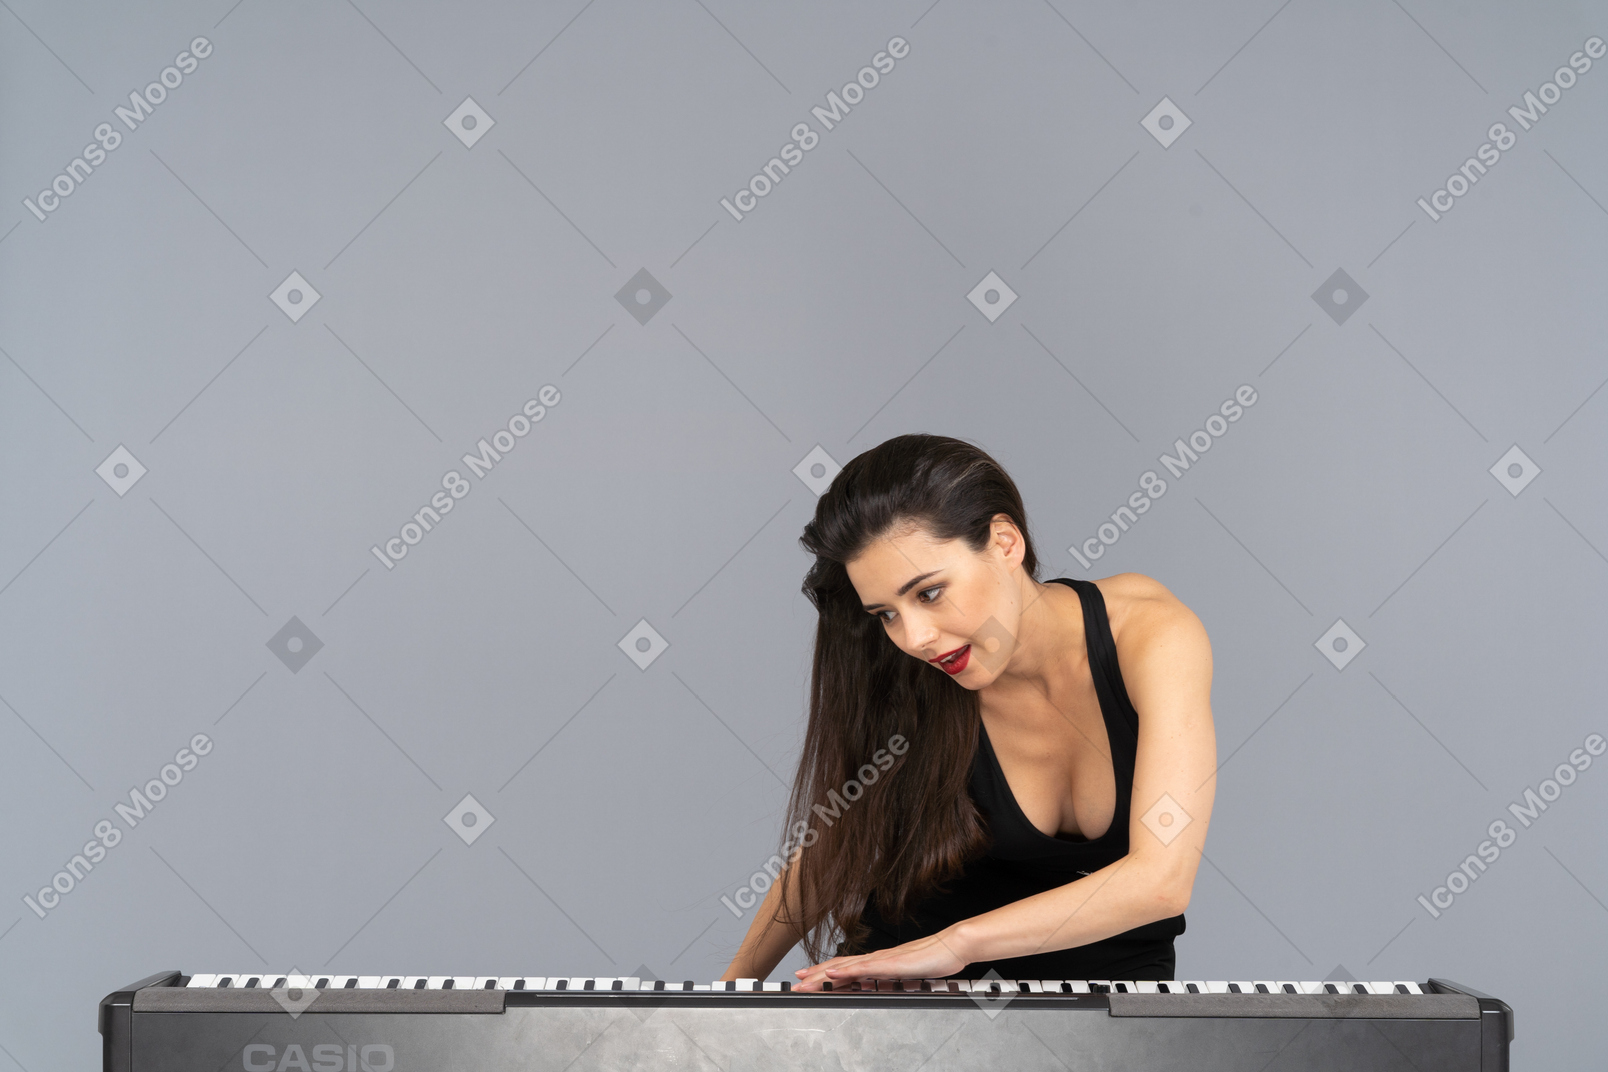 Front view of a young lady in black dress putting her hand on keyboard and leaning aside